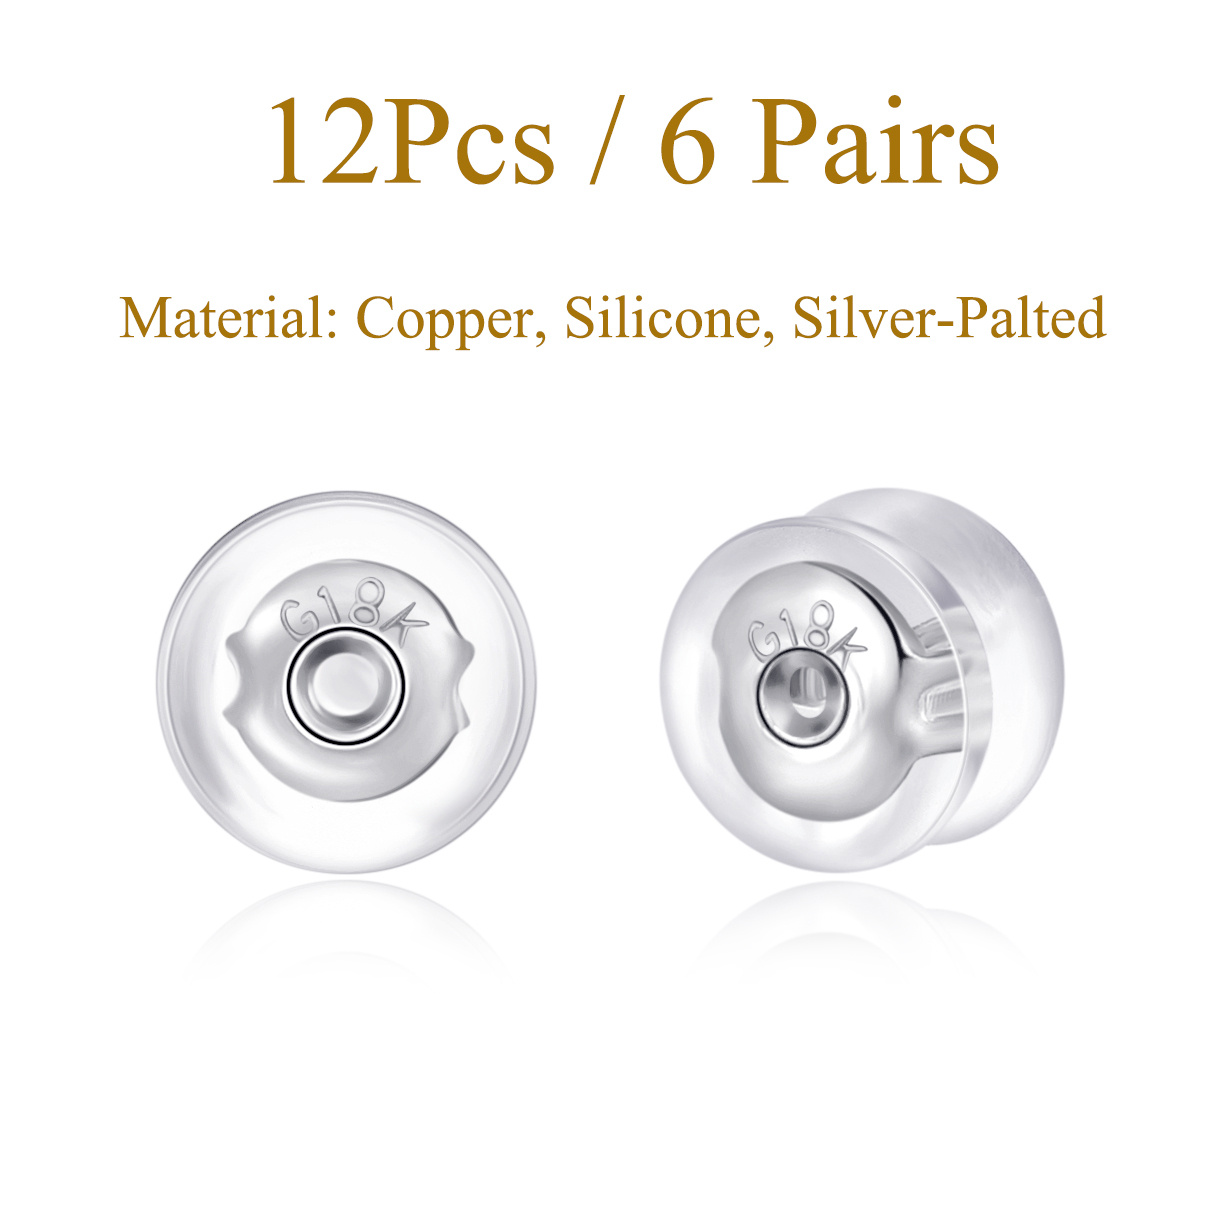 EARRING BACKS FOR Studs Locking Secure Silver Silicone For women